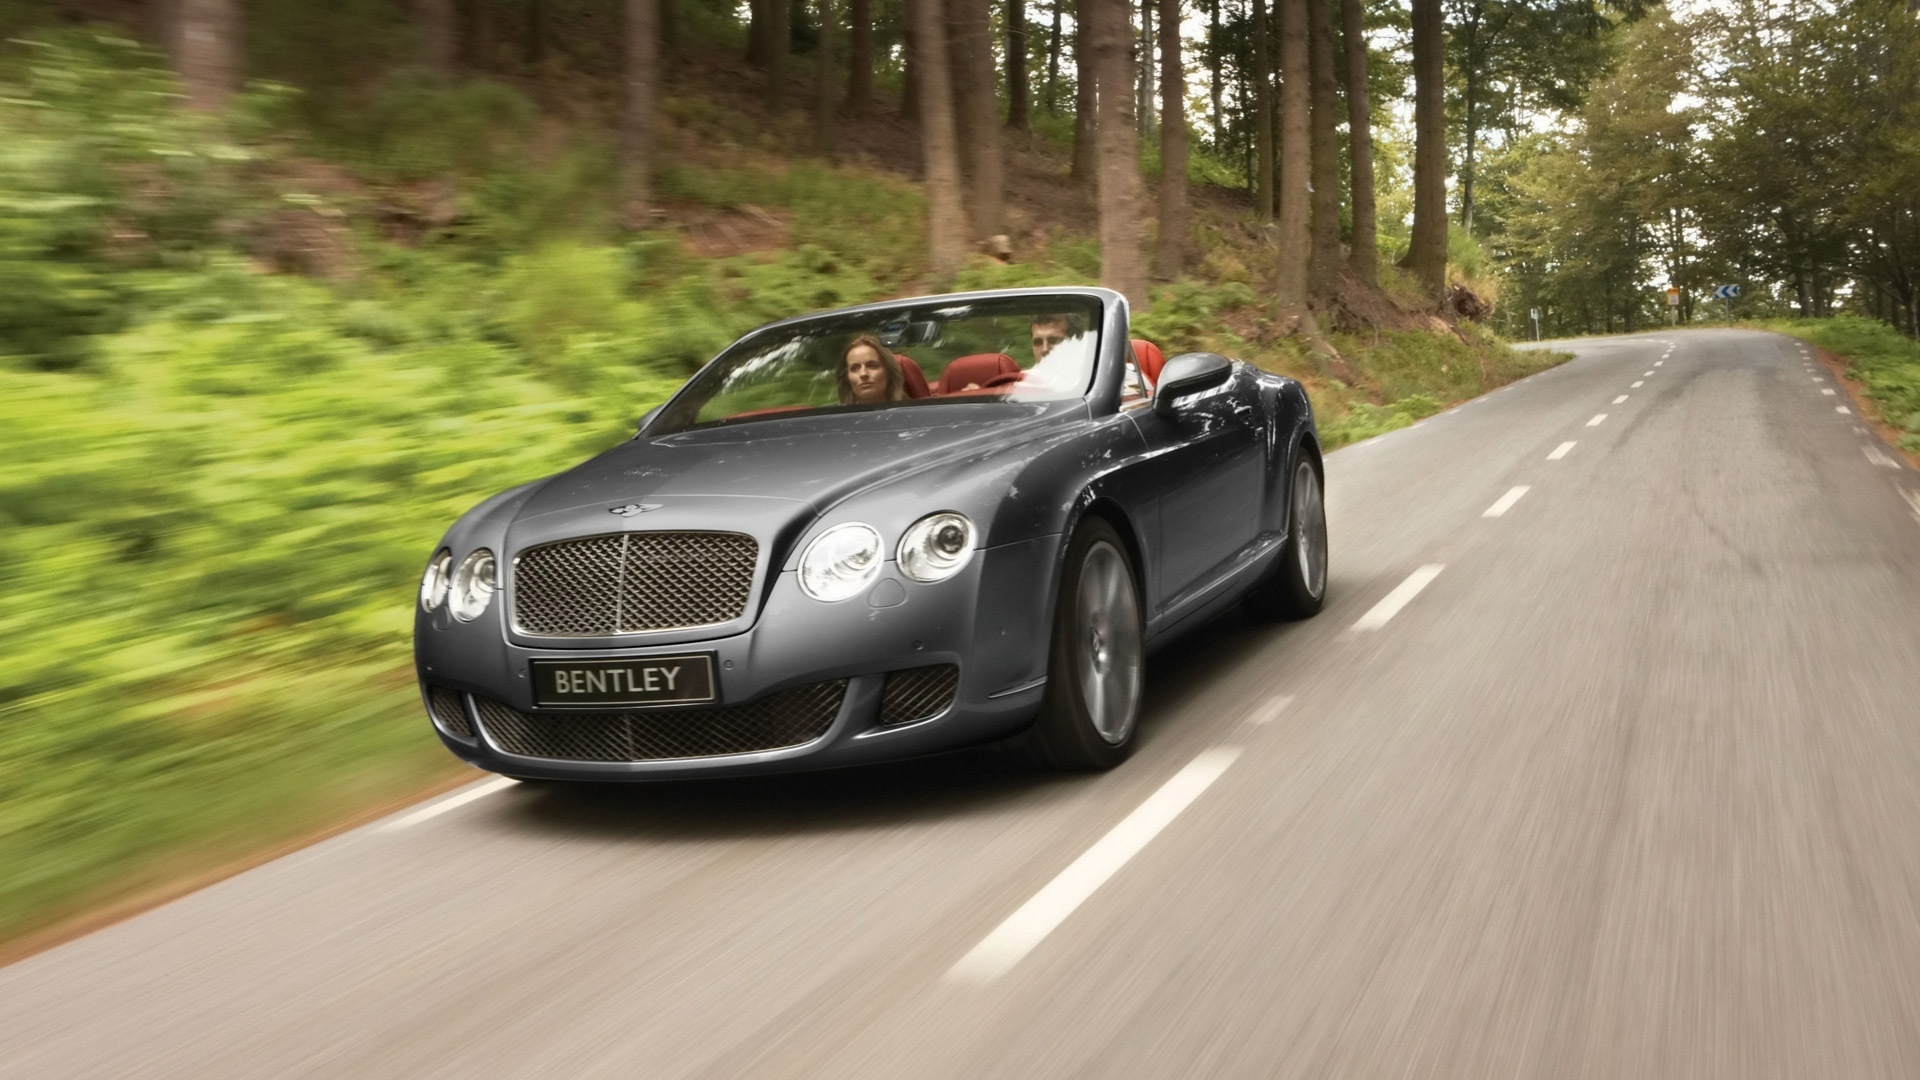 Bentley Continental GTC Speed 2009 for 1920 x 1080 HDTV 1080p resolution